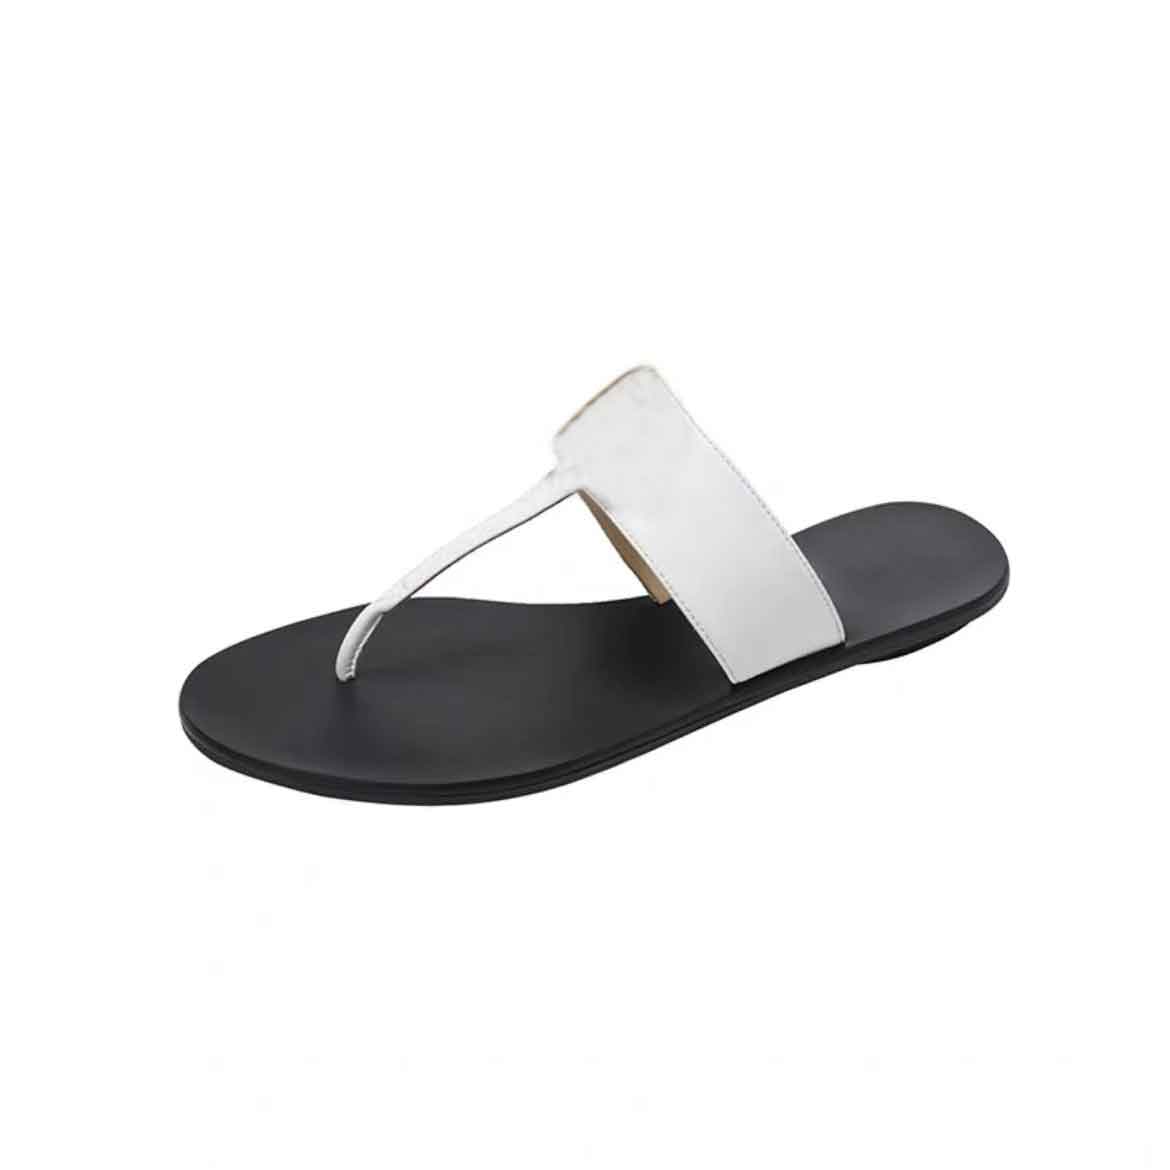 New Luxury Slippers Flip-flops Designer leather Thong Sandals double letter metal label fashion classic flats summer beach indoor classic slippery sandals